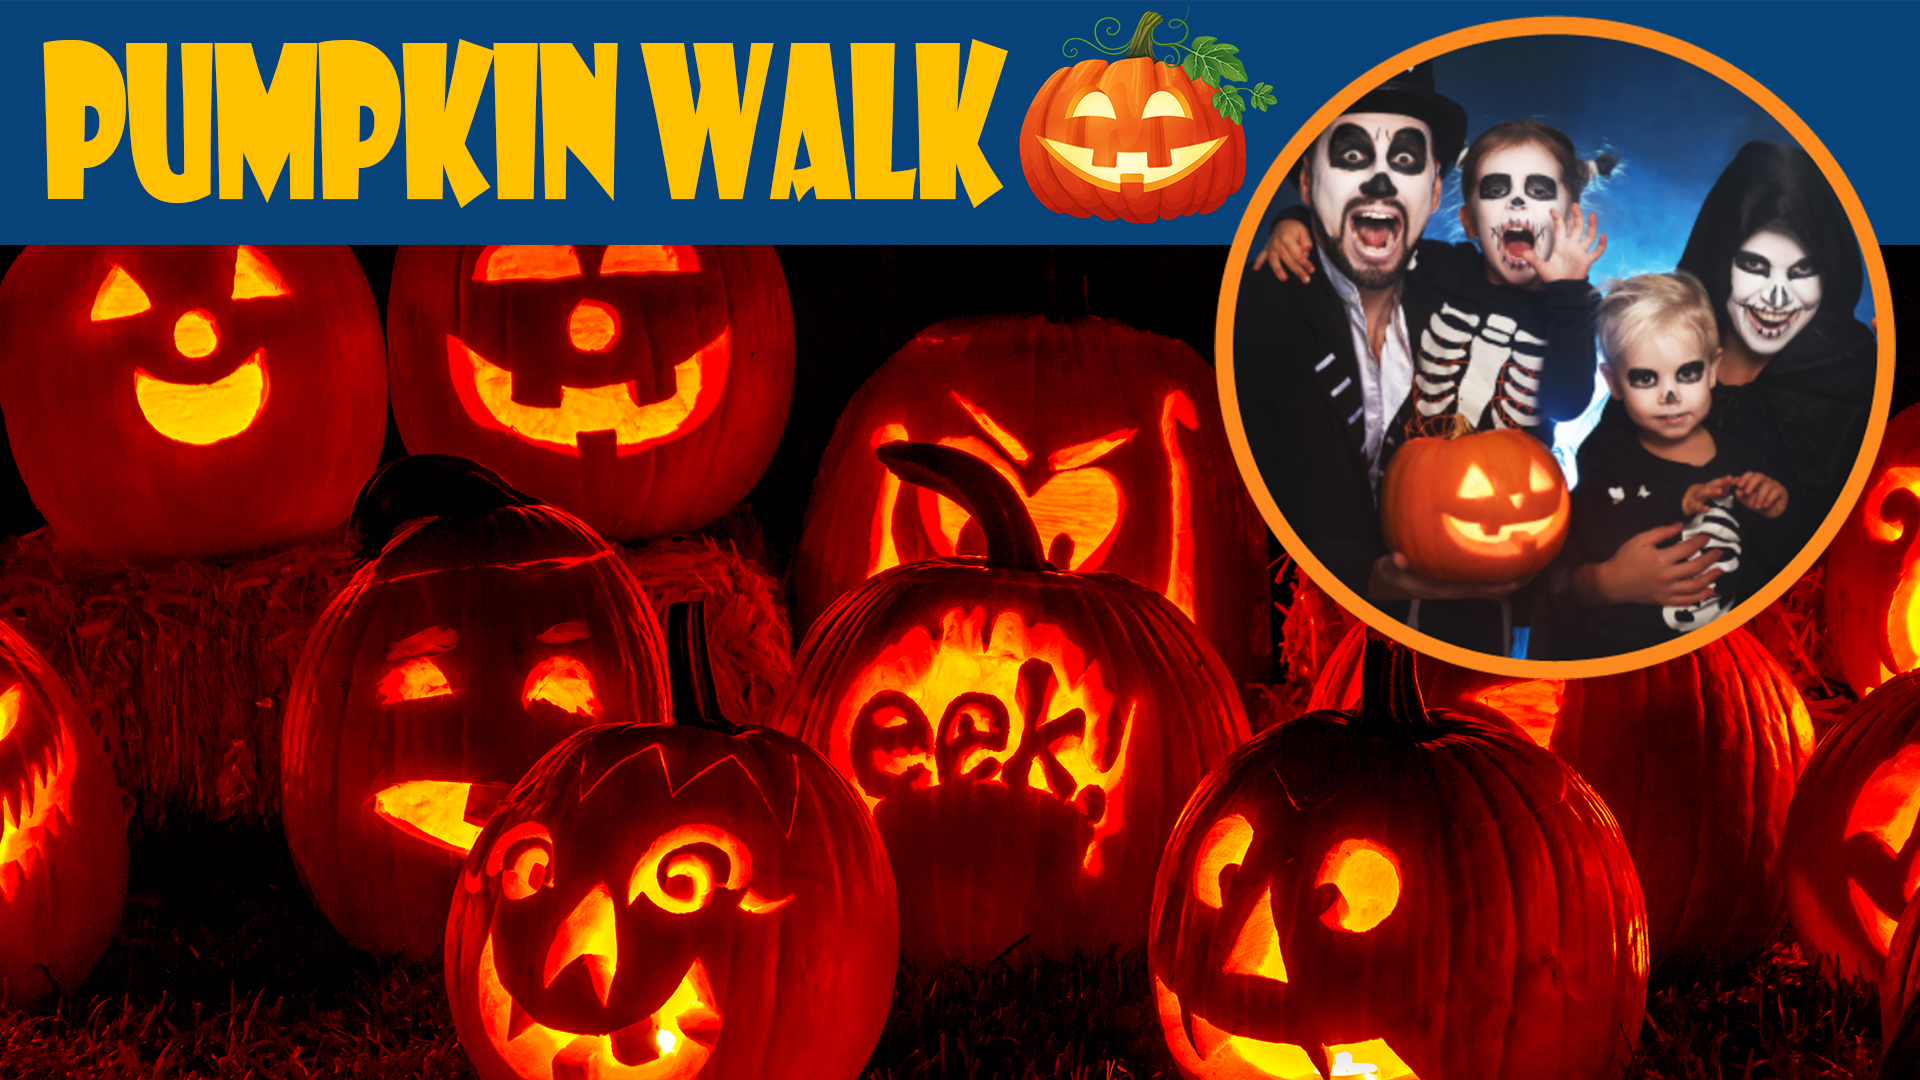 Image reads "Pumpkin Walk" a photo of candle lit jack-o-lanterns takes up the majority of the image. A circle with a family in costume is in the top right corner.